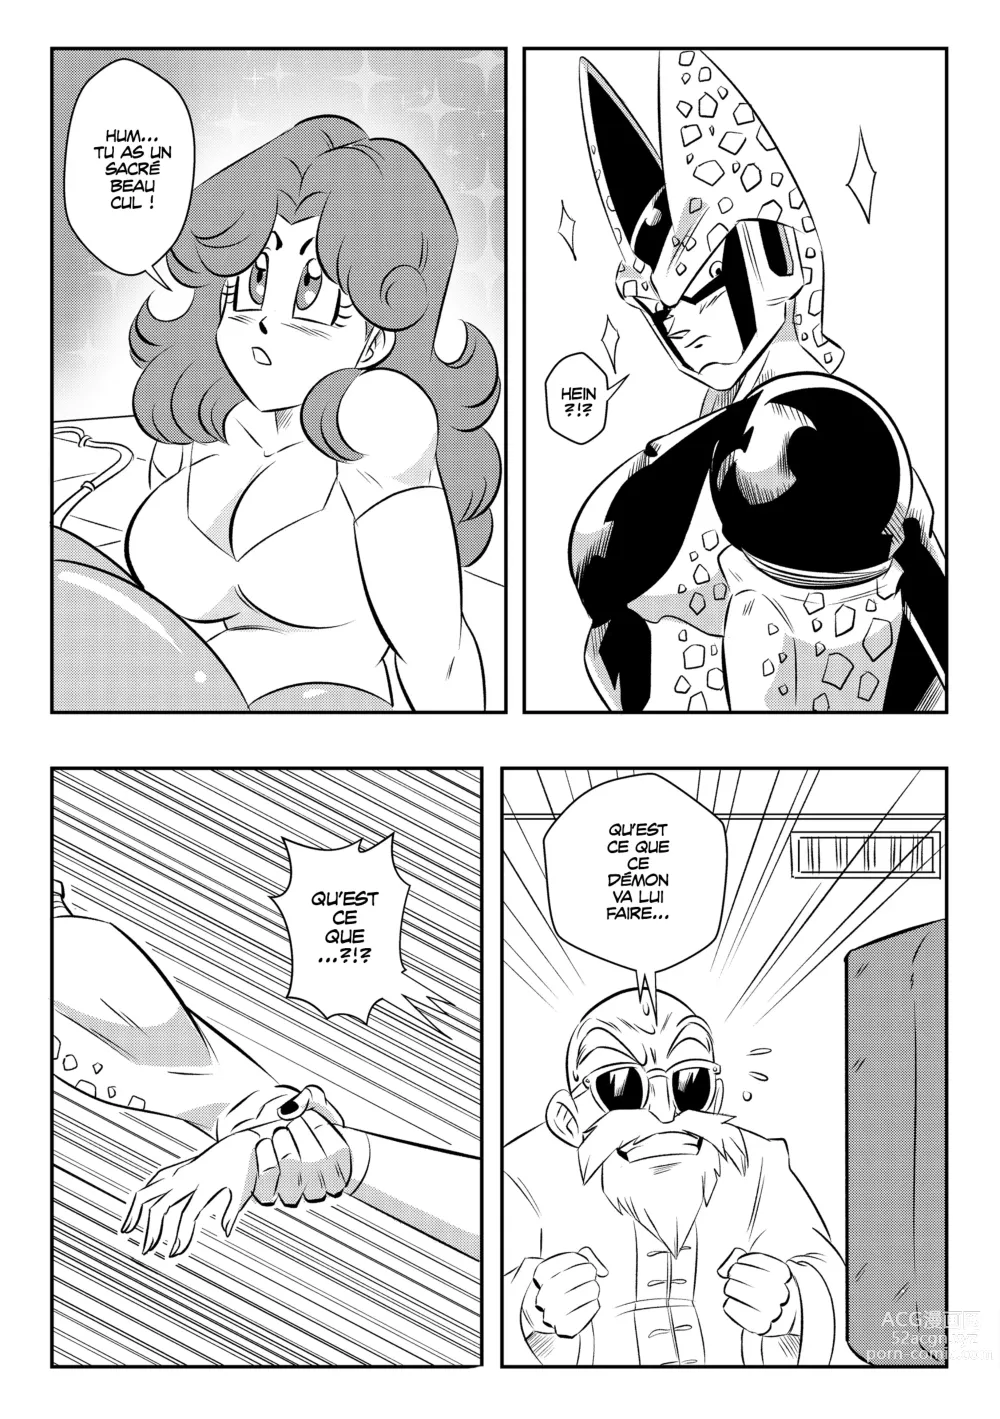 Page 7 of doujinshi perfect broascast